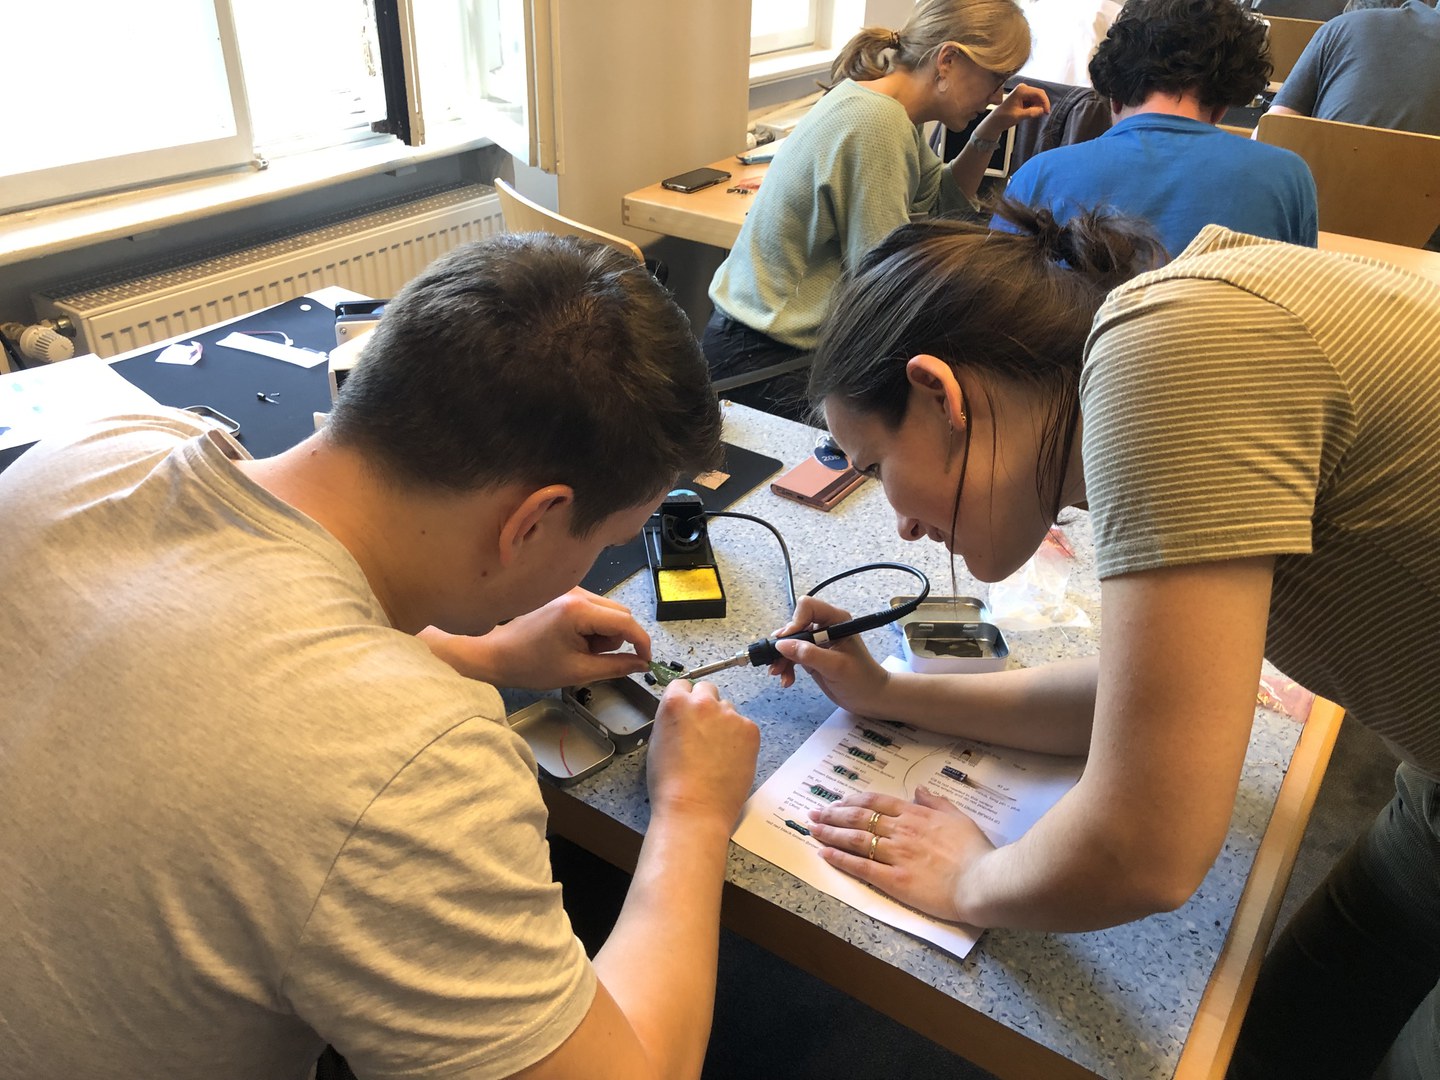 Students soldering at the workshop during the color meets flavor school